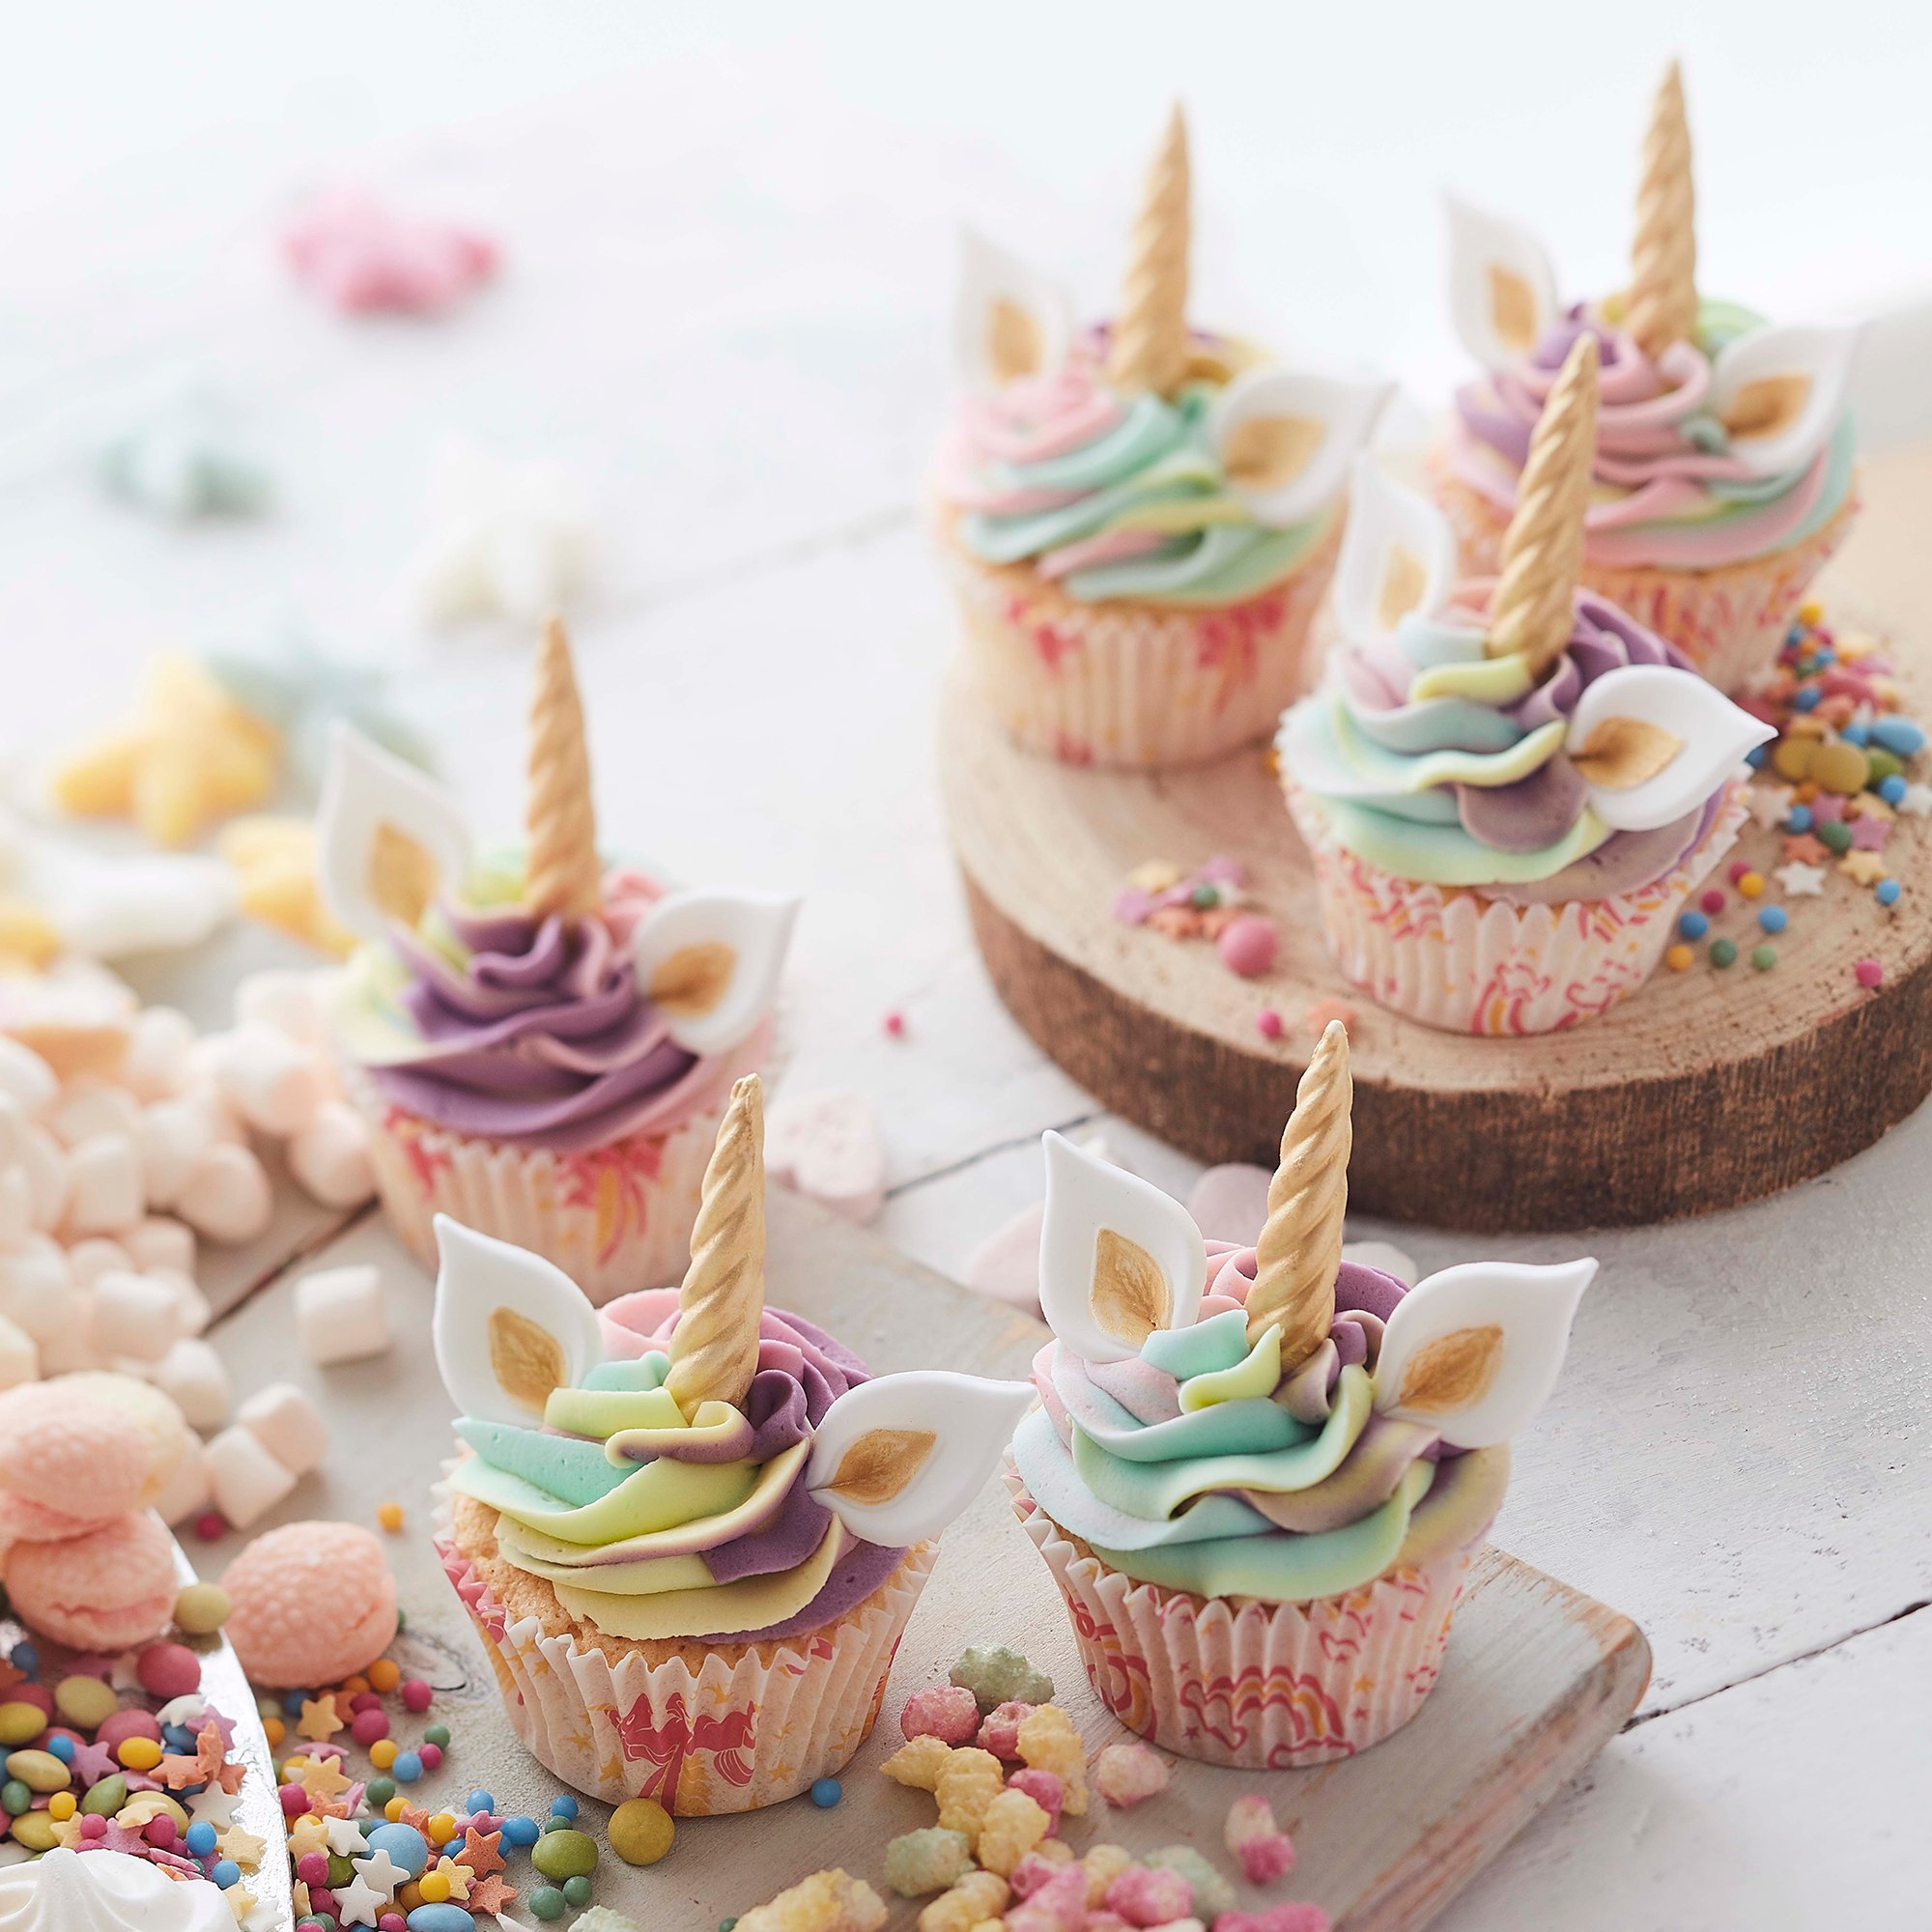 Unicorn Cupcakes - The perfect school holiday baking project - My Kids Lick  The Bowl